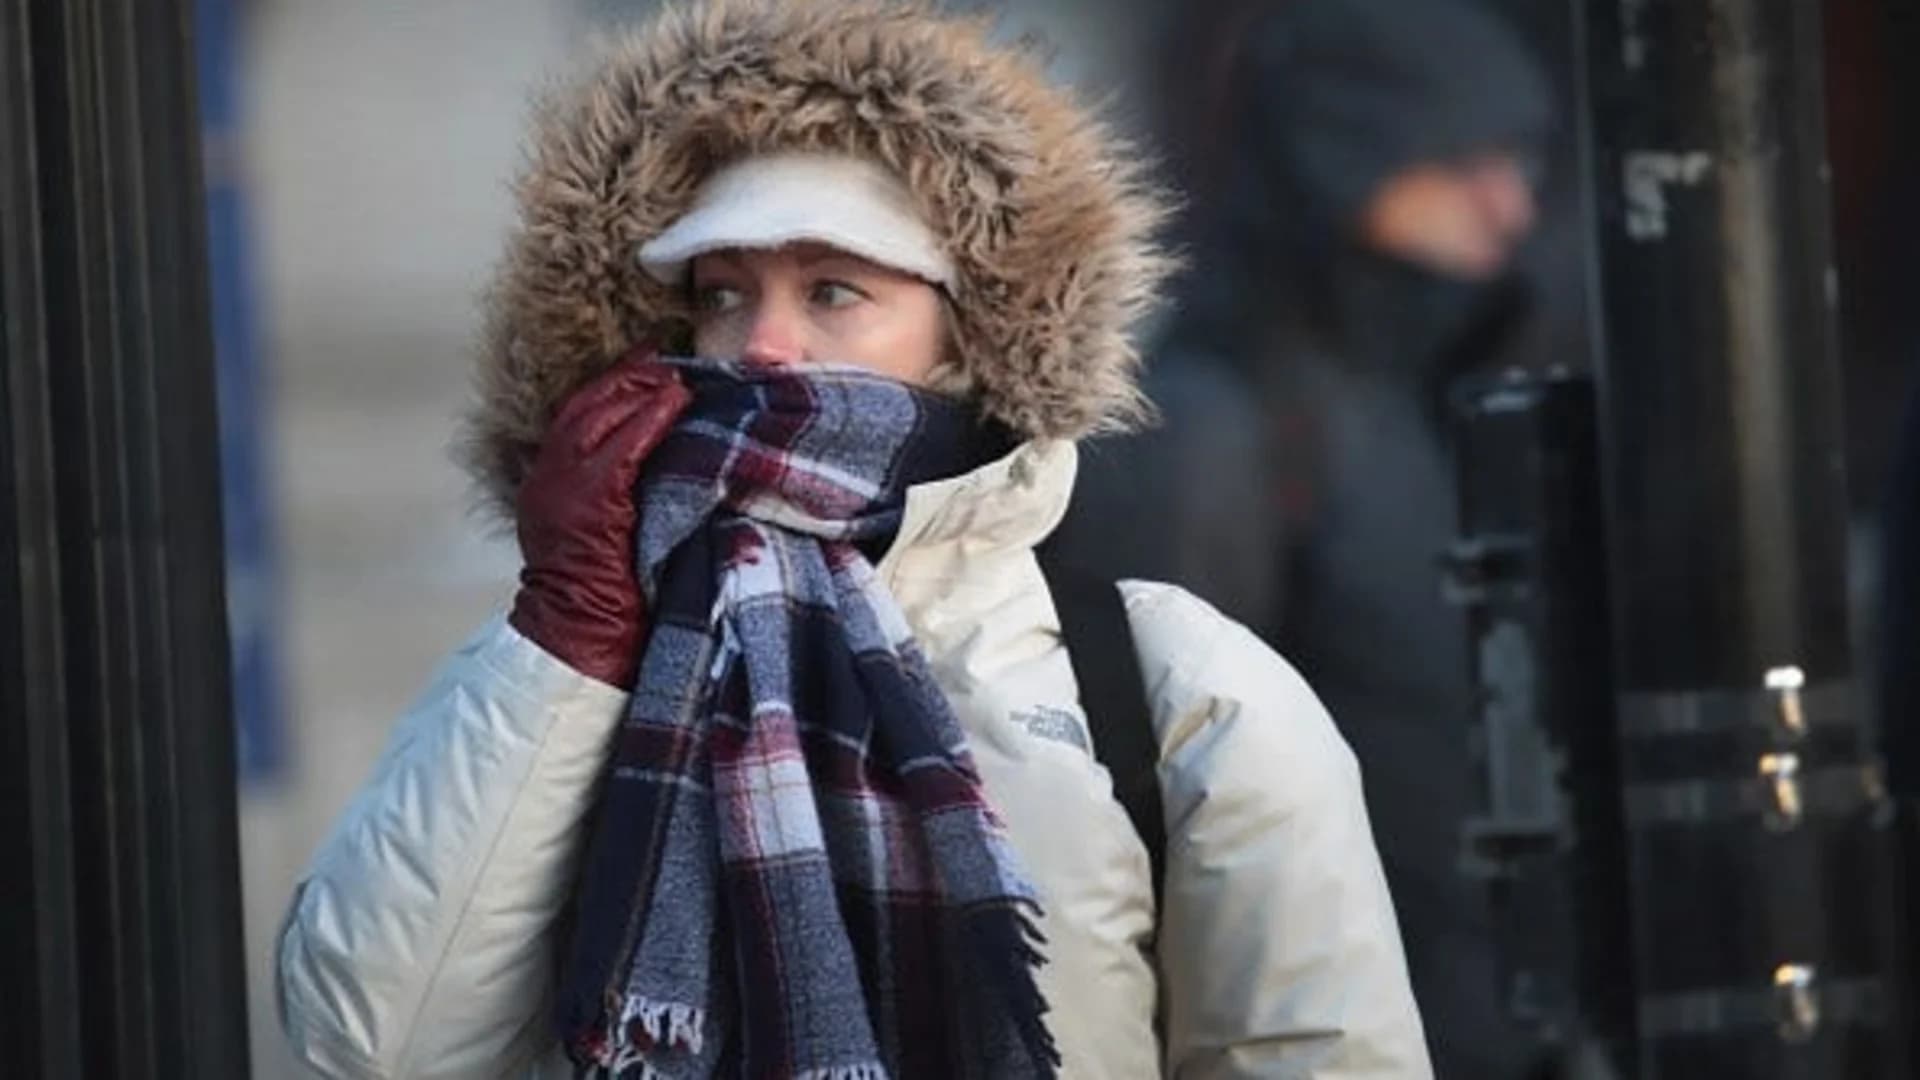 Weather: Partly sunny with temps rising above freezing